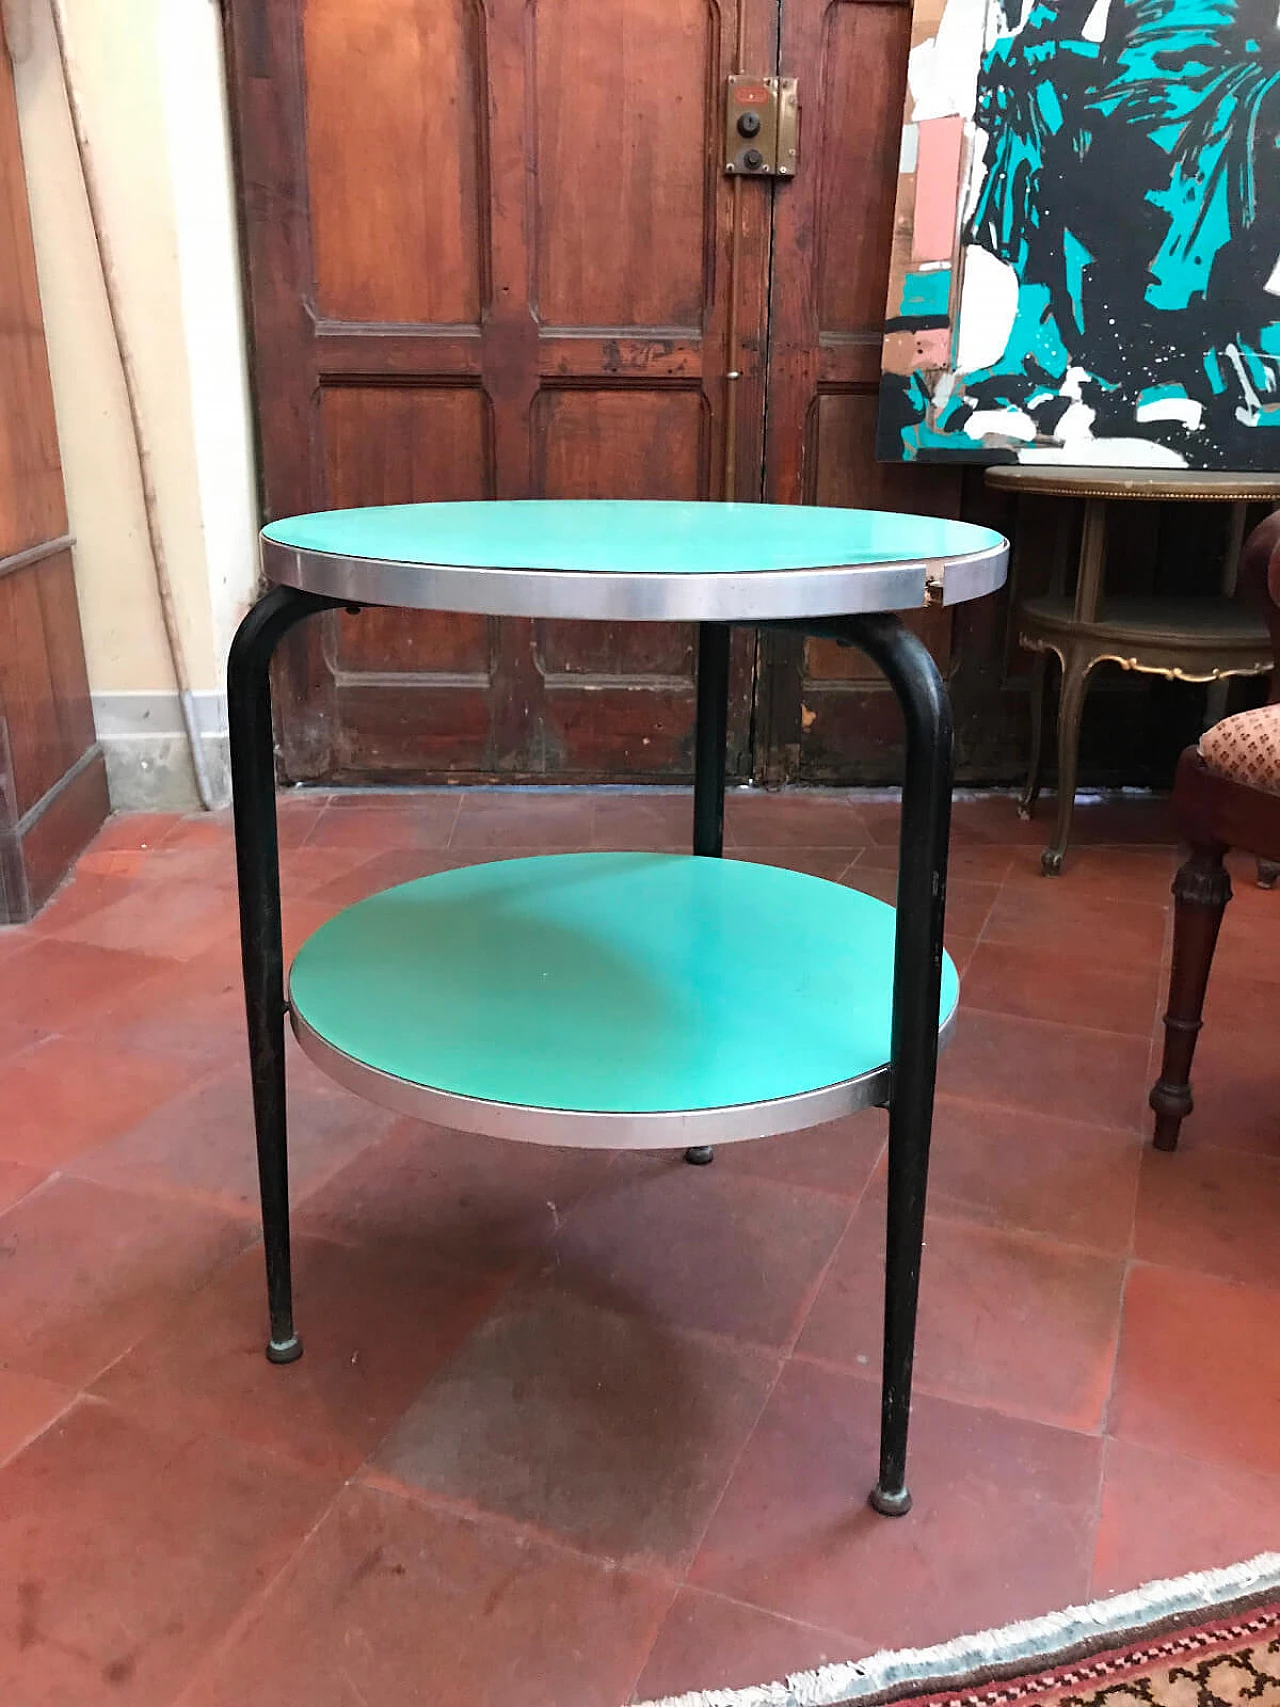 Green round coffee table with two shelves from the '50s 1045813